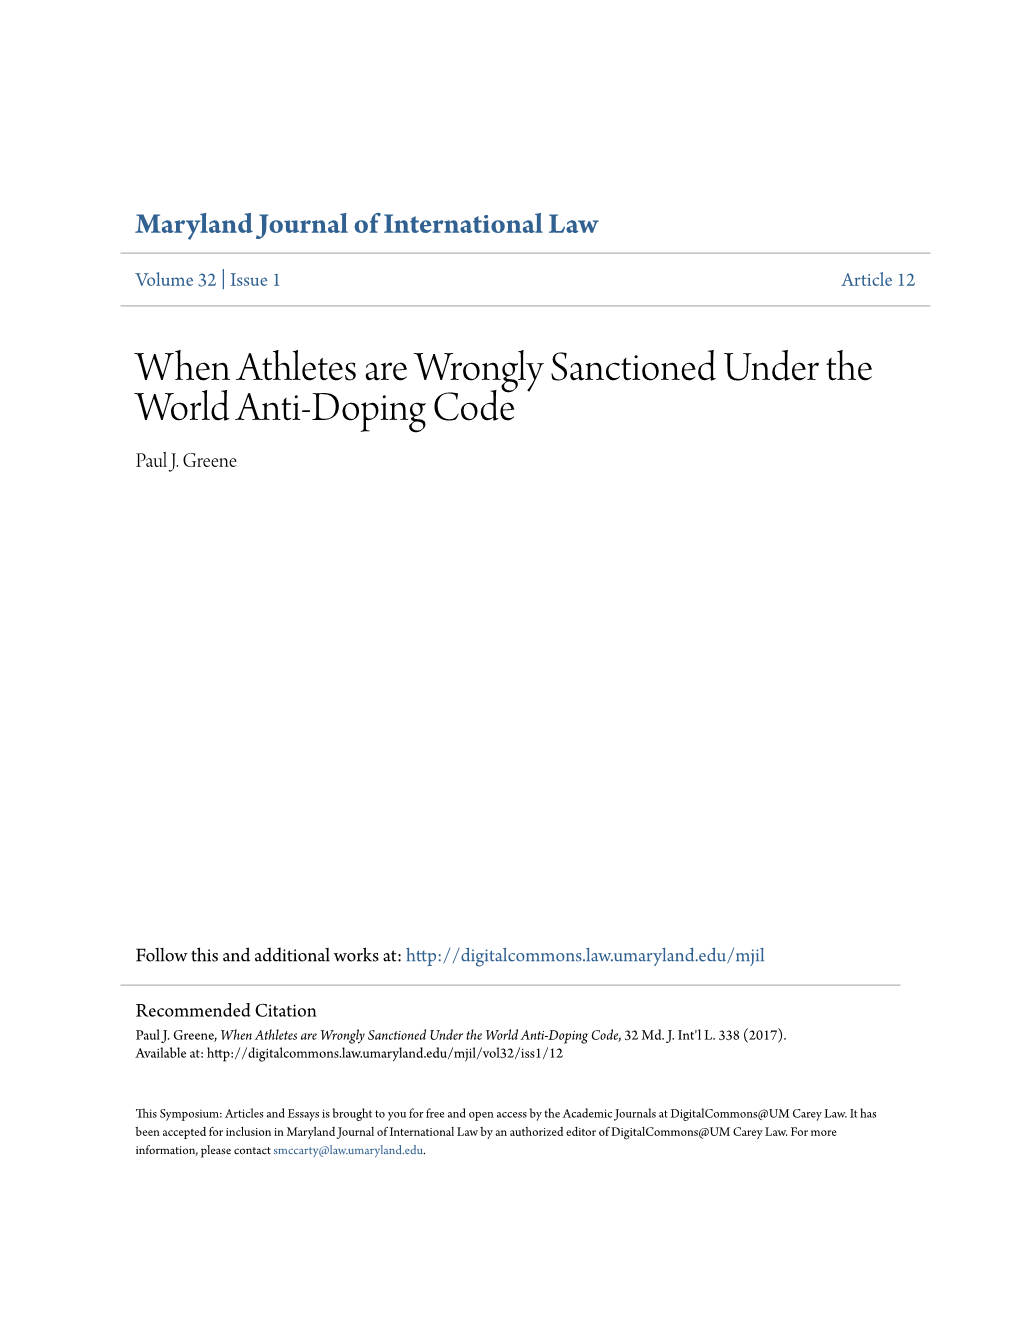 When Athletes Are Wrongly Sanctioned Under the World Anti-Doping Code Paul J